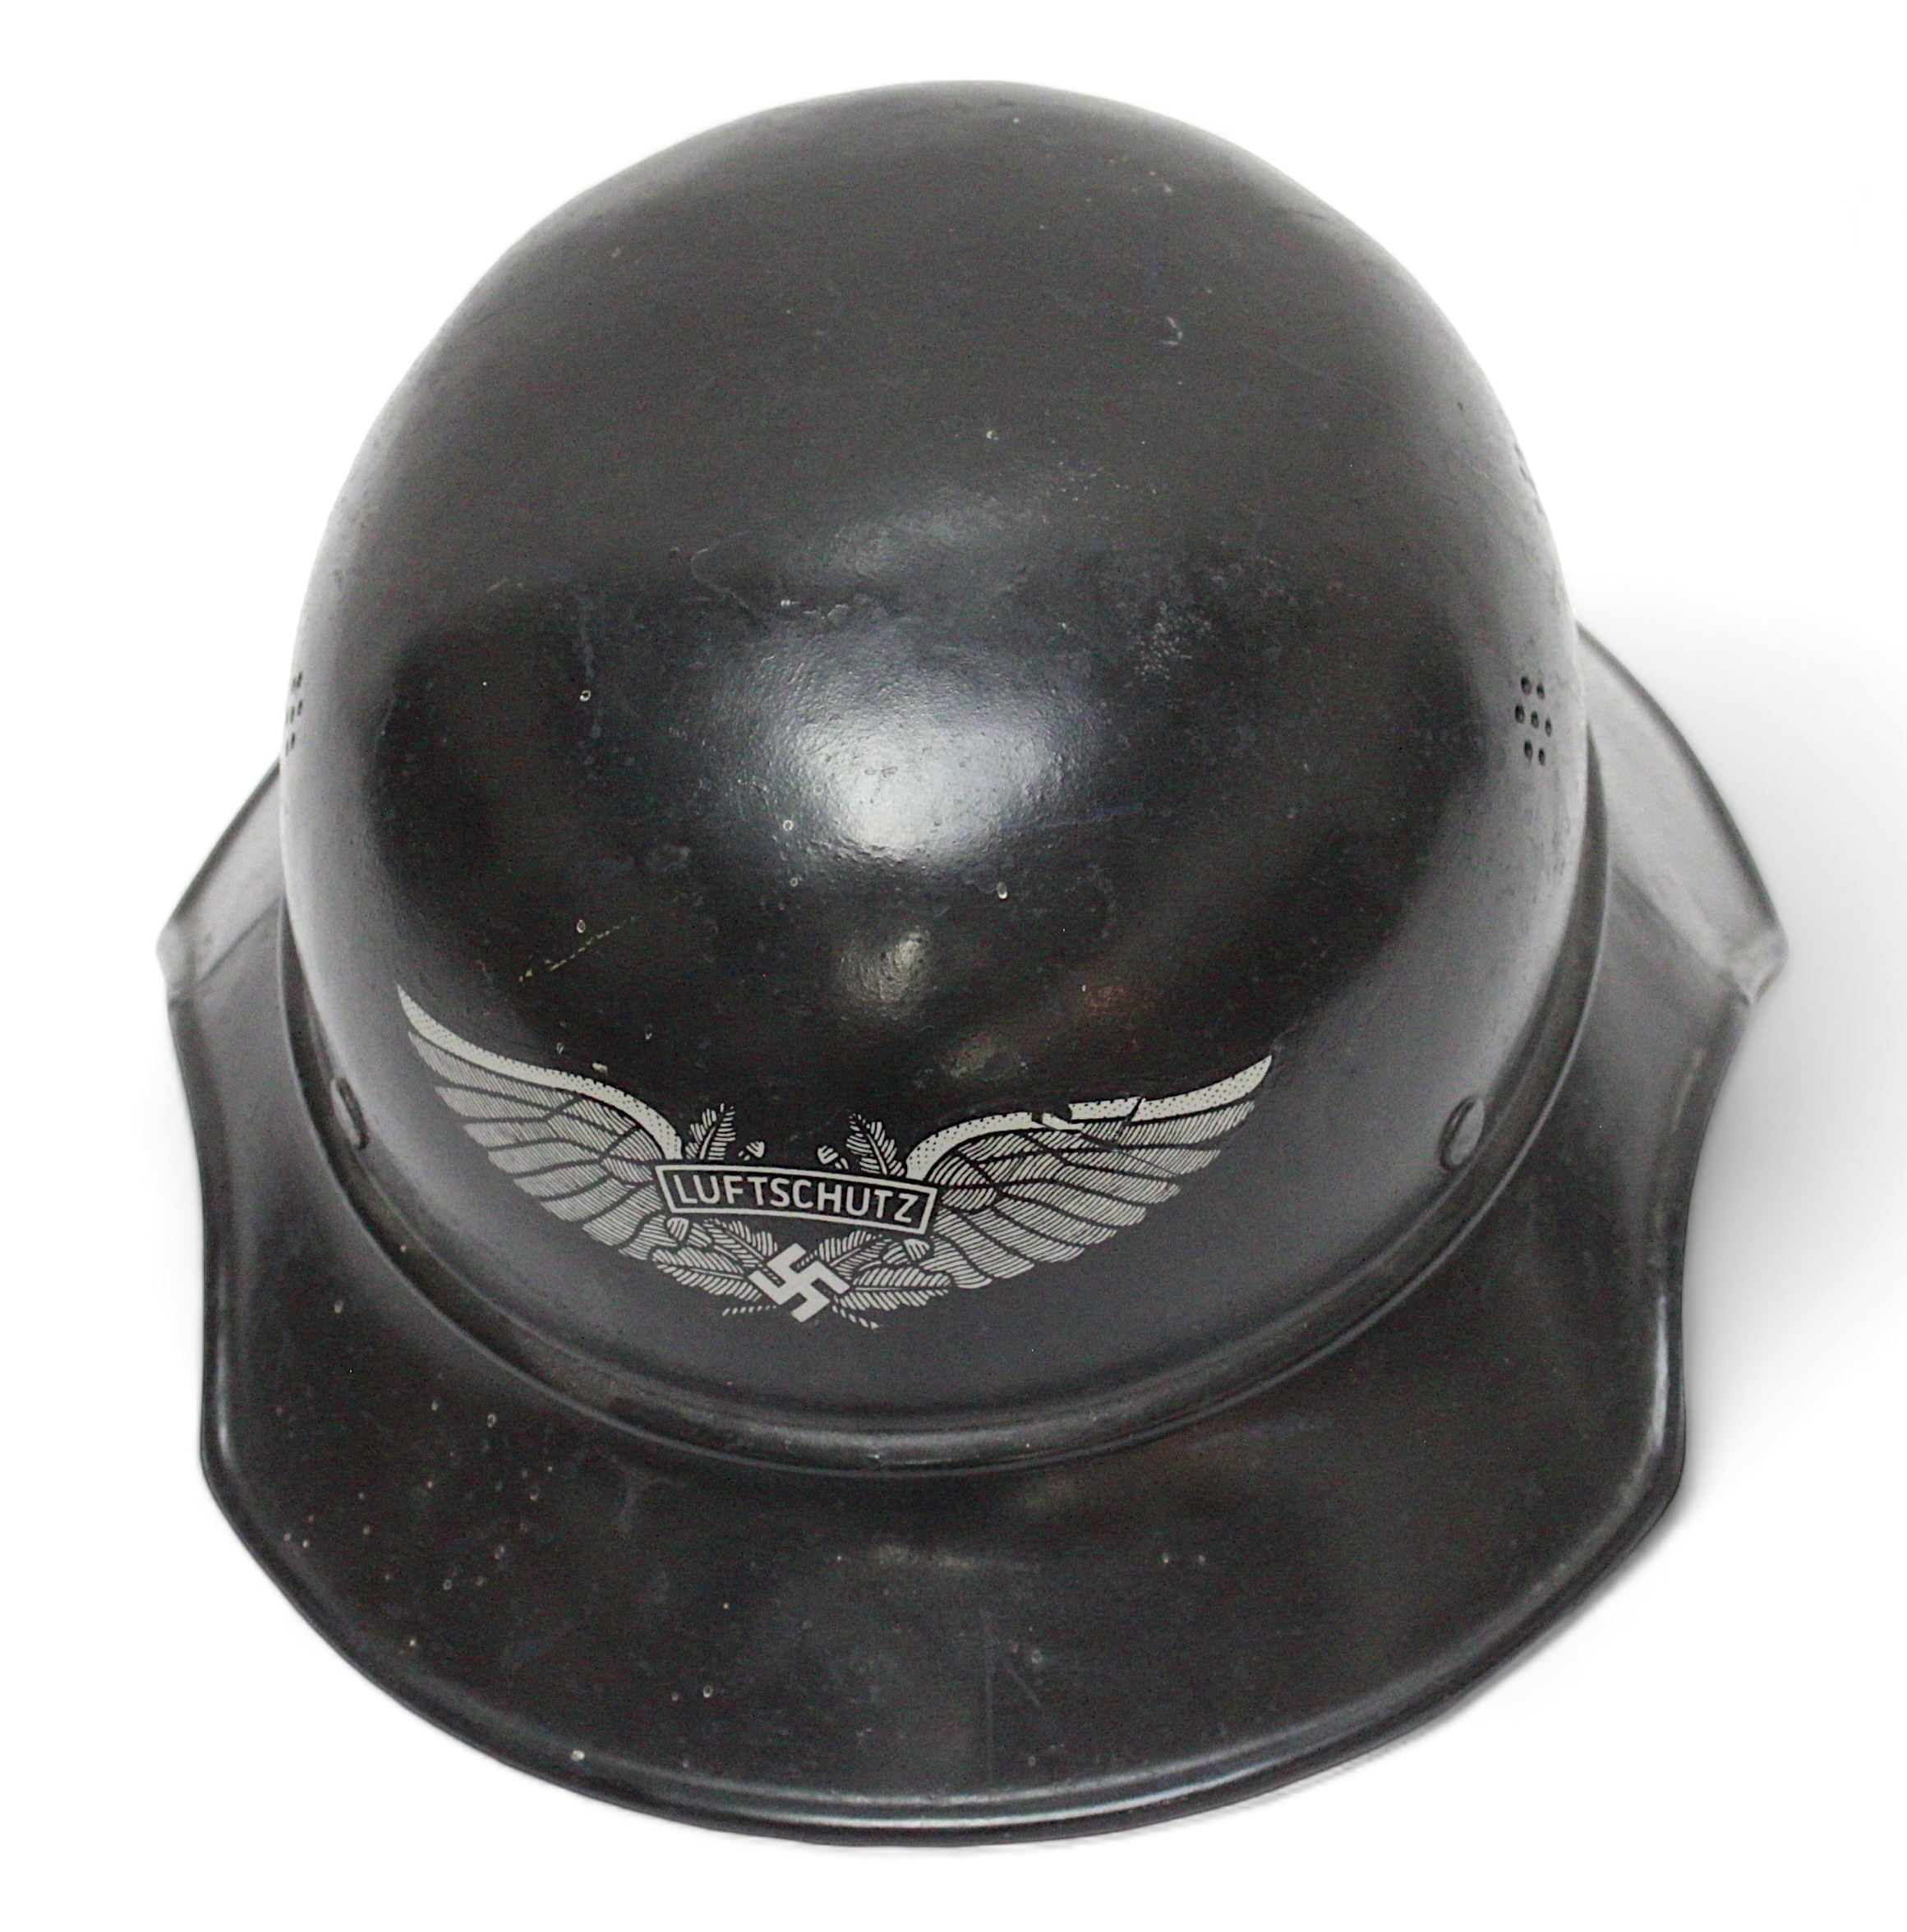 A German WWII Luftschutz ‘Air Raid Protection’ steel helmet, gladiator pattern, with liner and